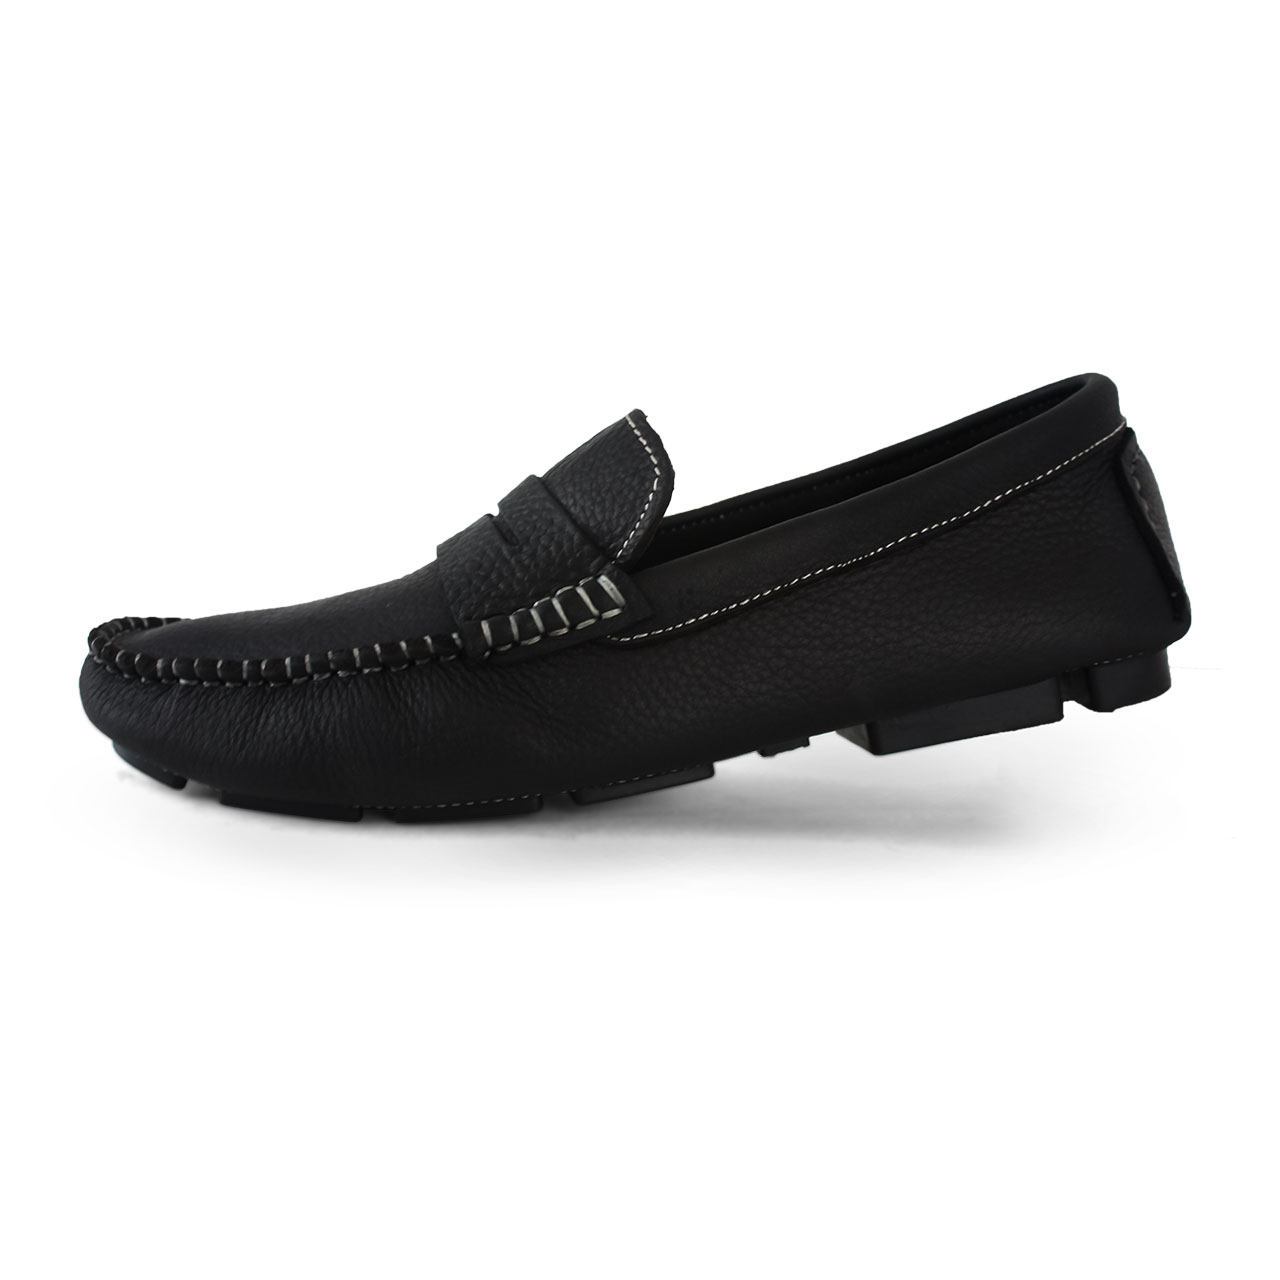 Mens Suede Black Loafers Slip On Casual Penny Flats Heel Shoes